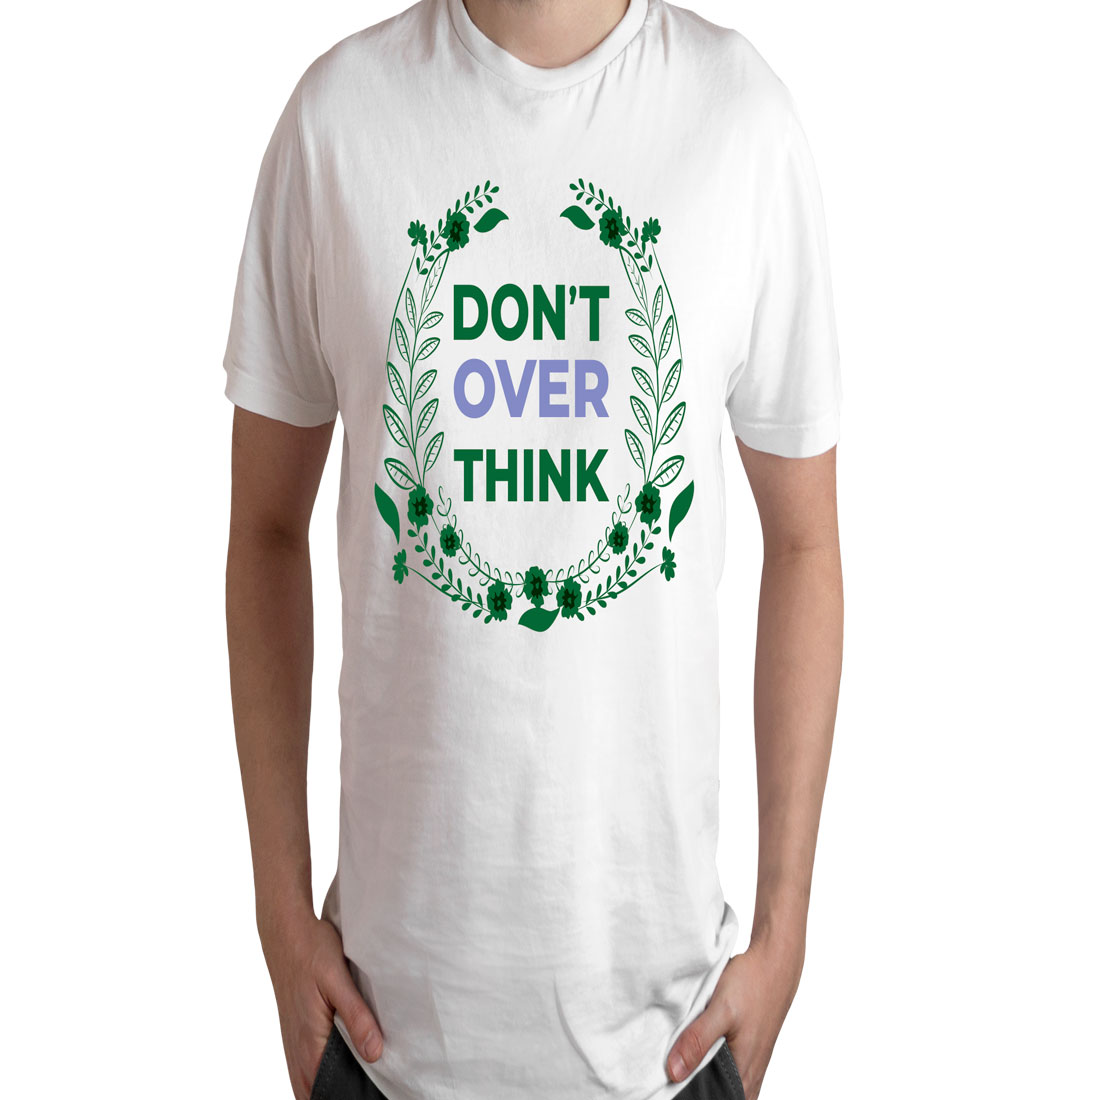 Man wearing a t - shirt that says don't over think.